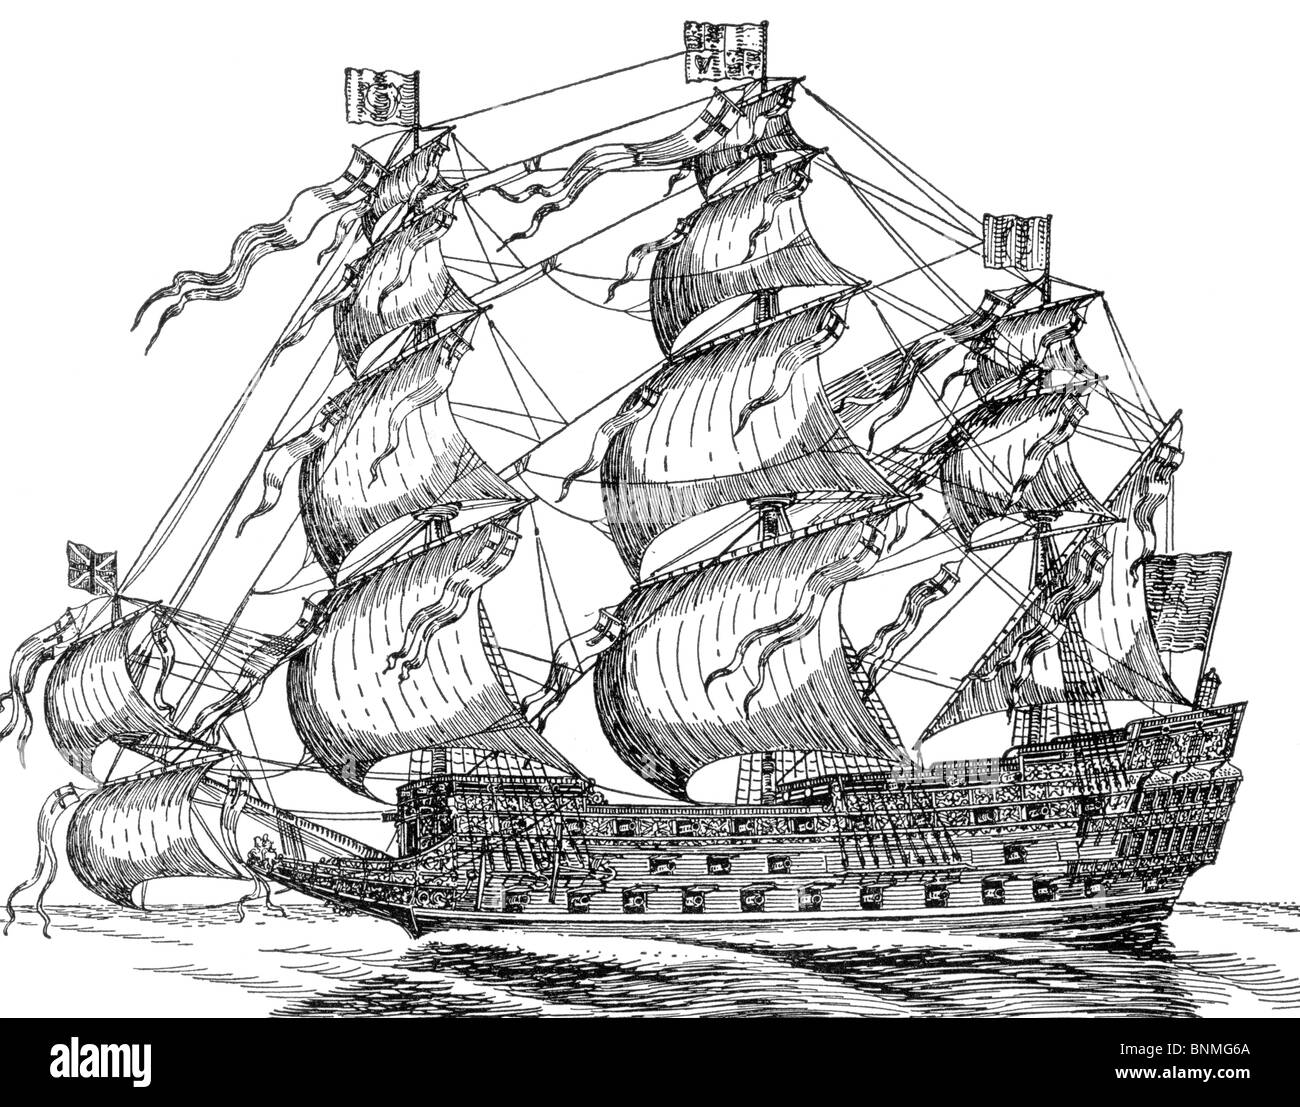 Black and White Illustration of The Sovereign of the Seas, a 17th Century naval vessel and Man o' War Stock Photo